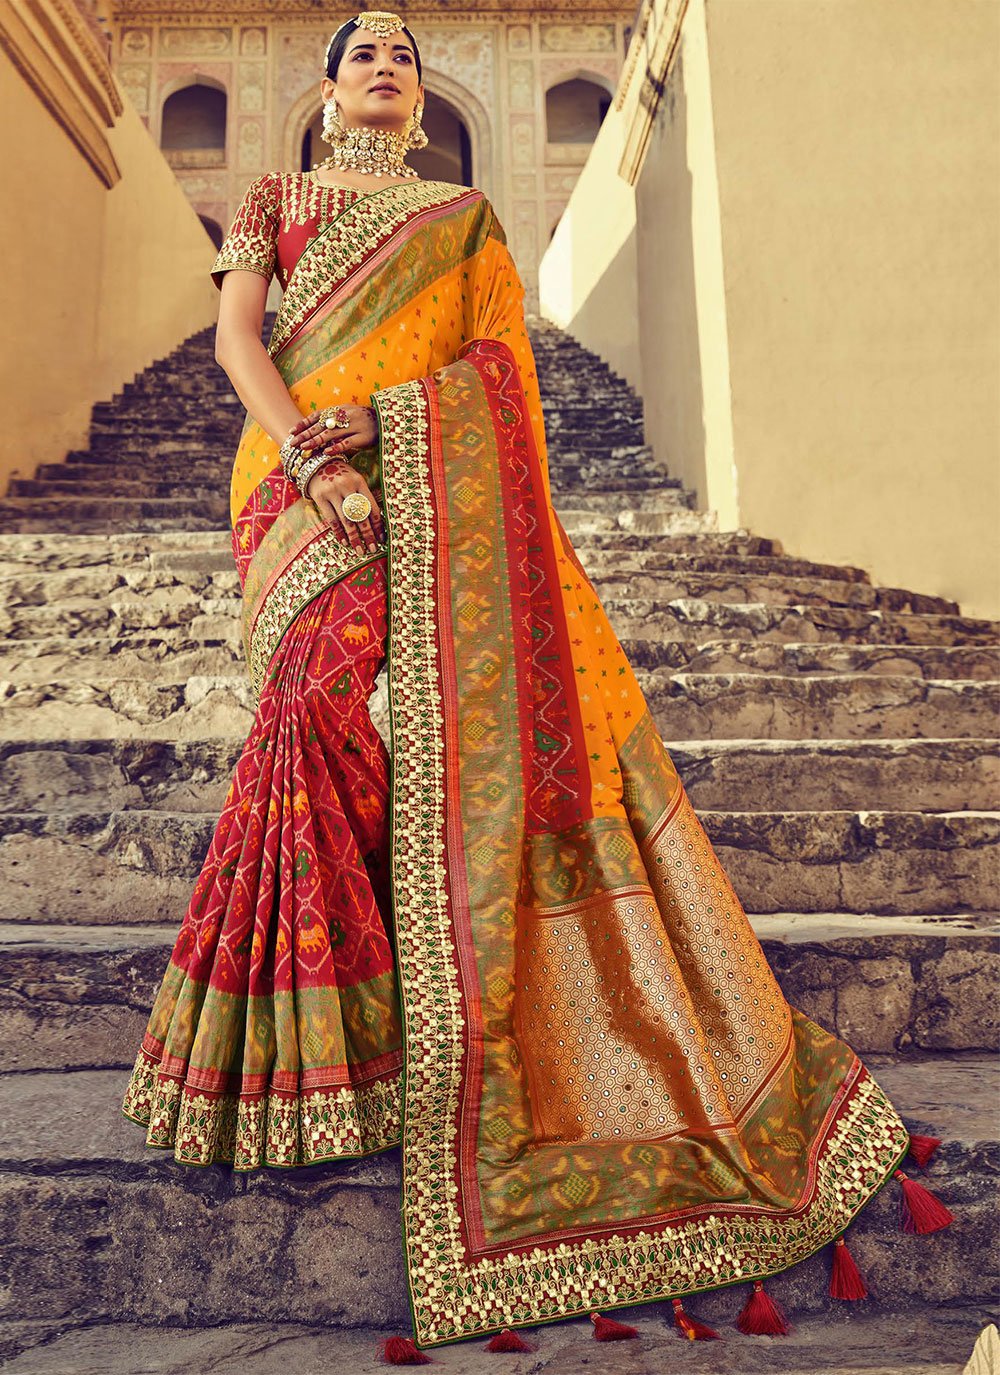          Indian Bridal Sarees for your intense dazzling look In wedding Season 2022!